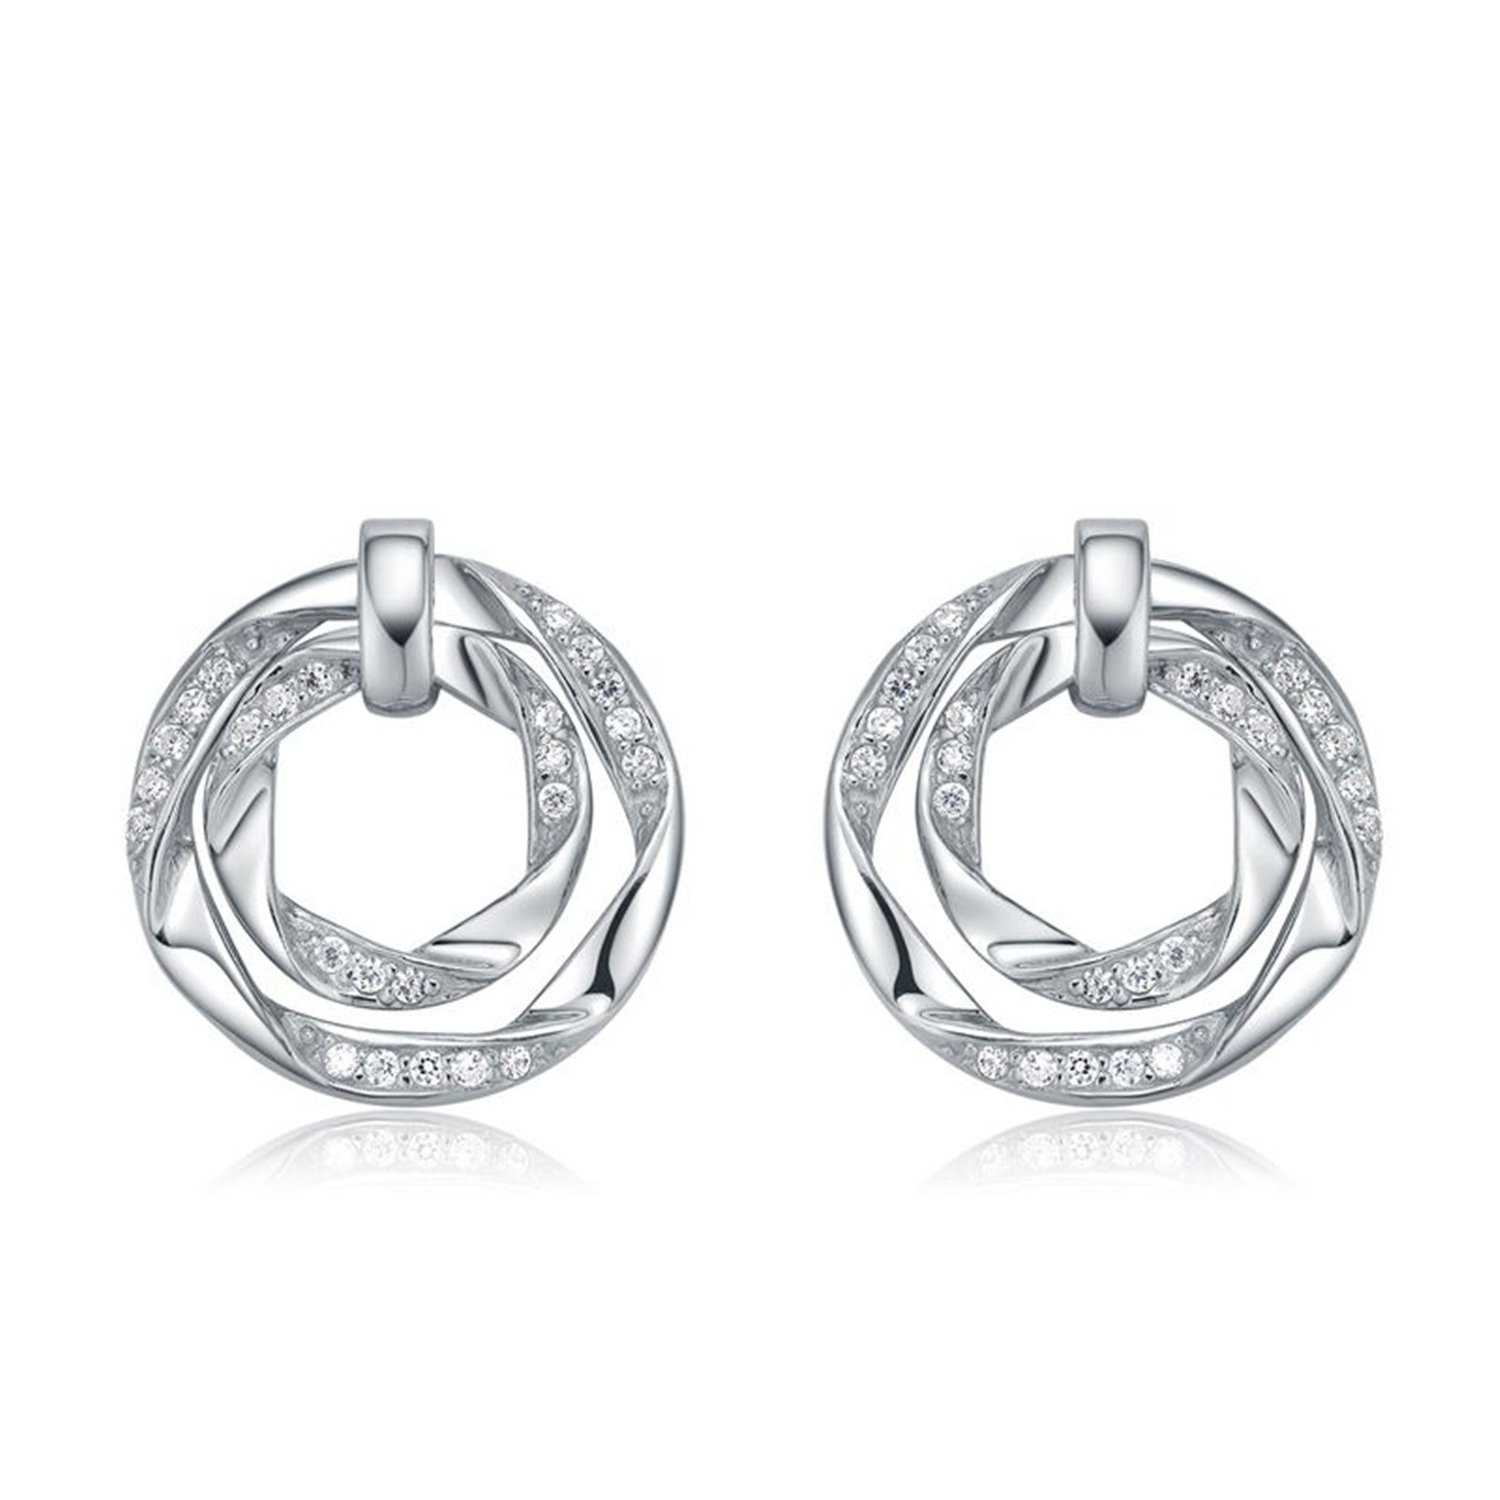 Elegant 925 Sterling Silver Hoop Earrings Necklace High Quality Women costum Jewelry Sets(图2)